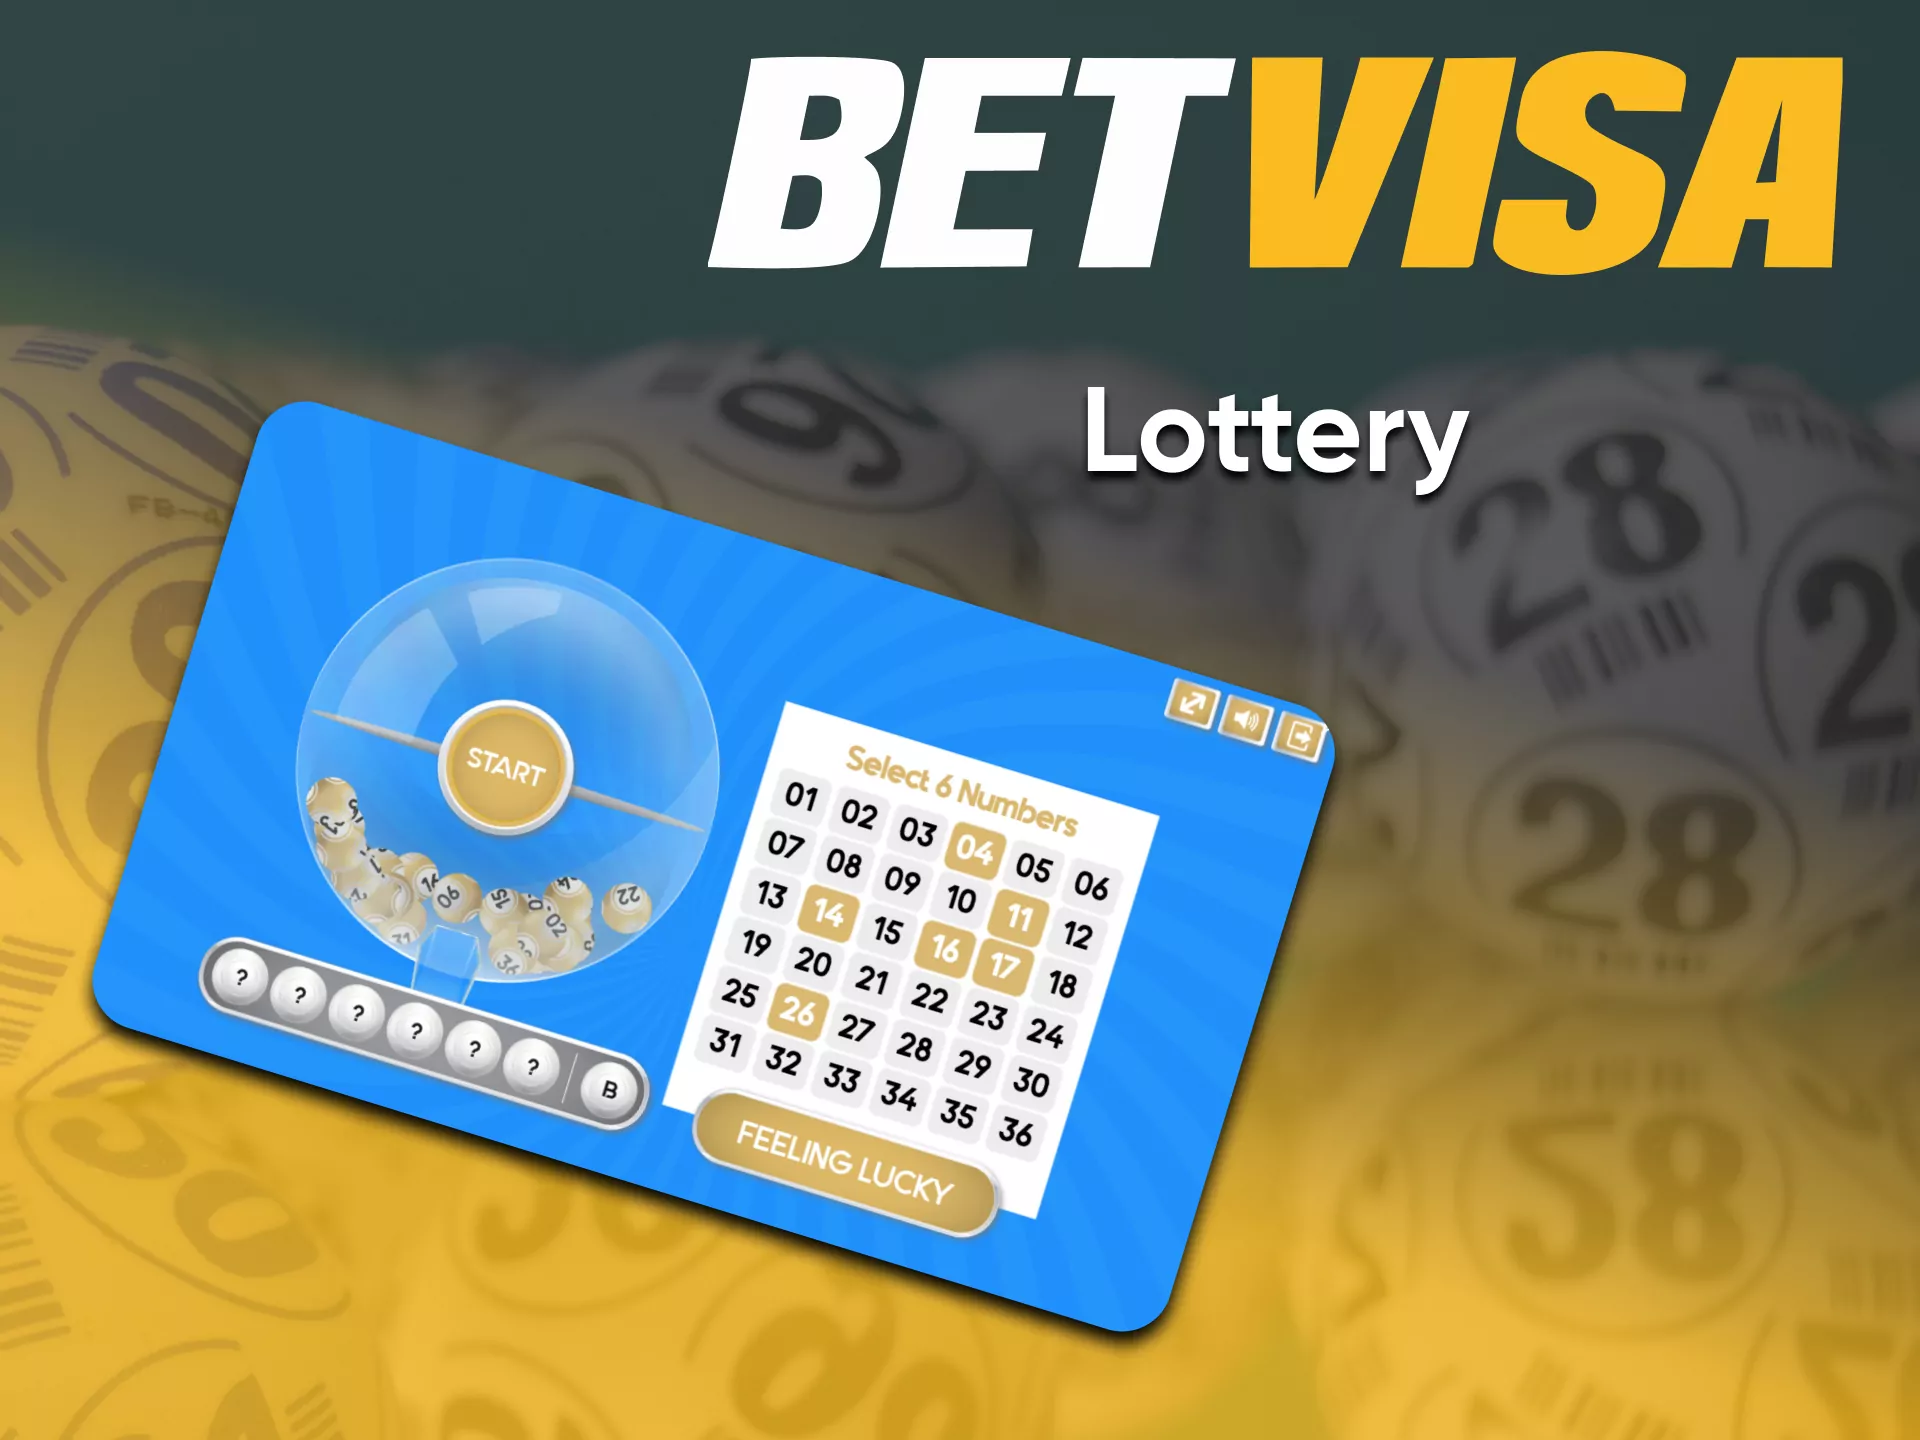 Go to the right section to buy a Lottery on BetVisa.